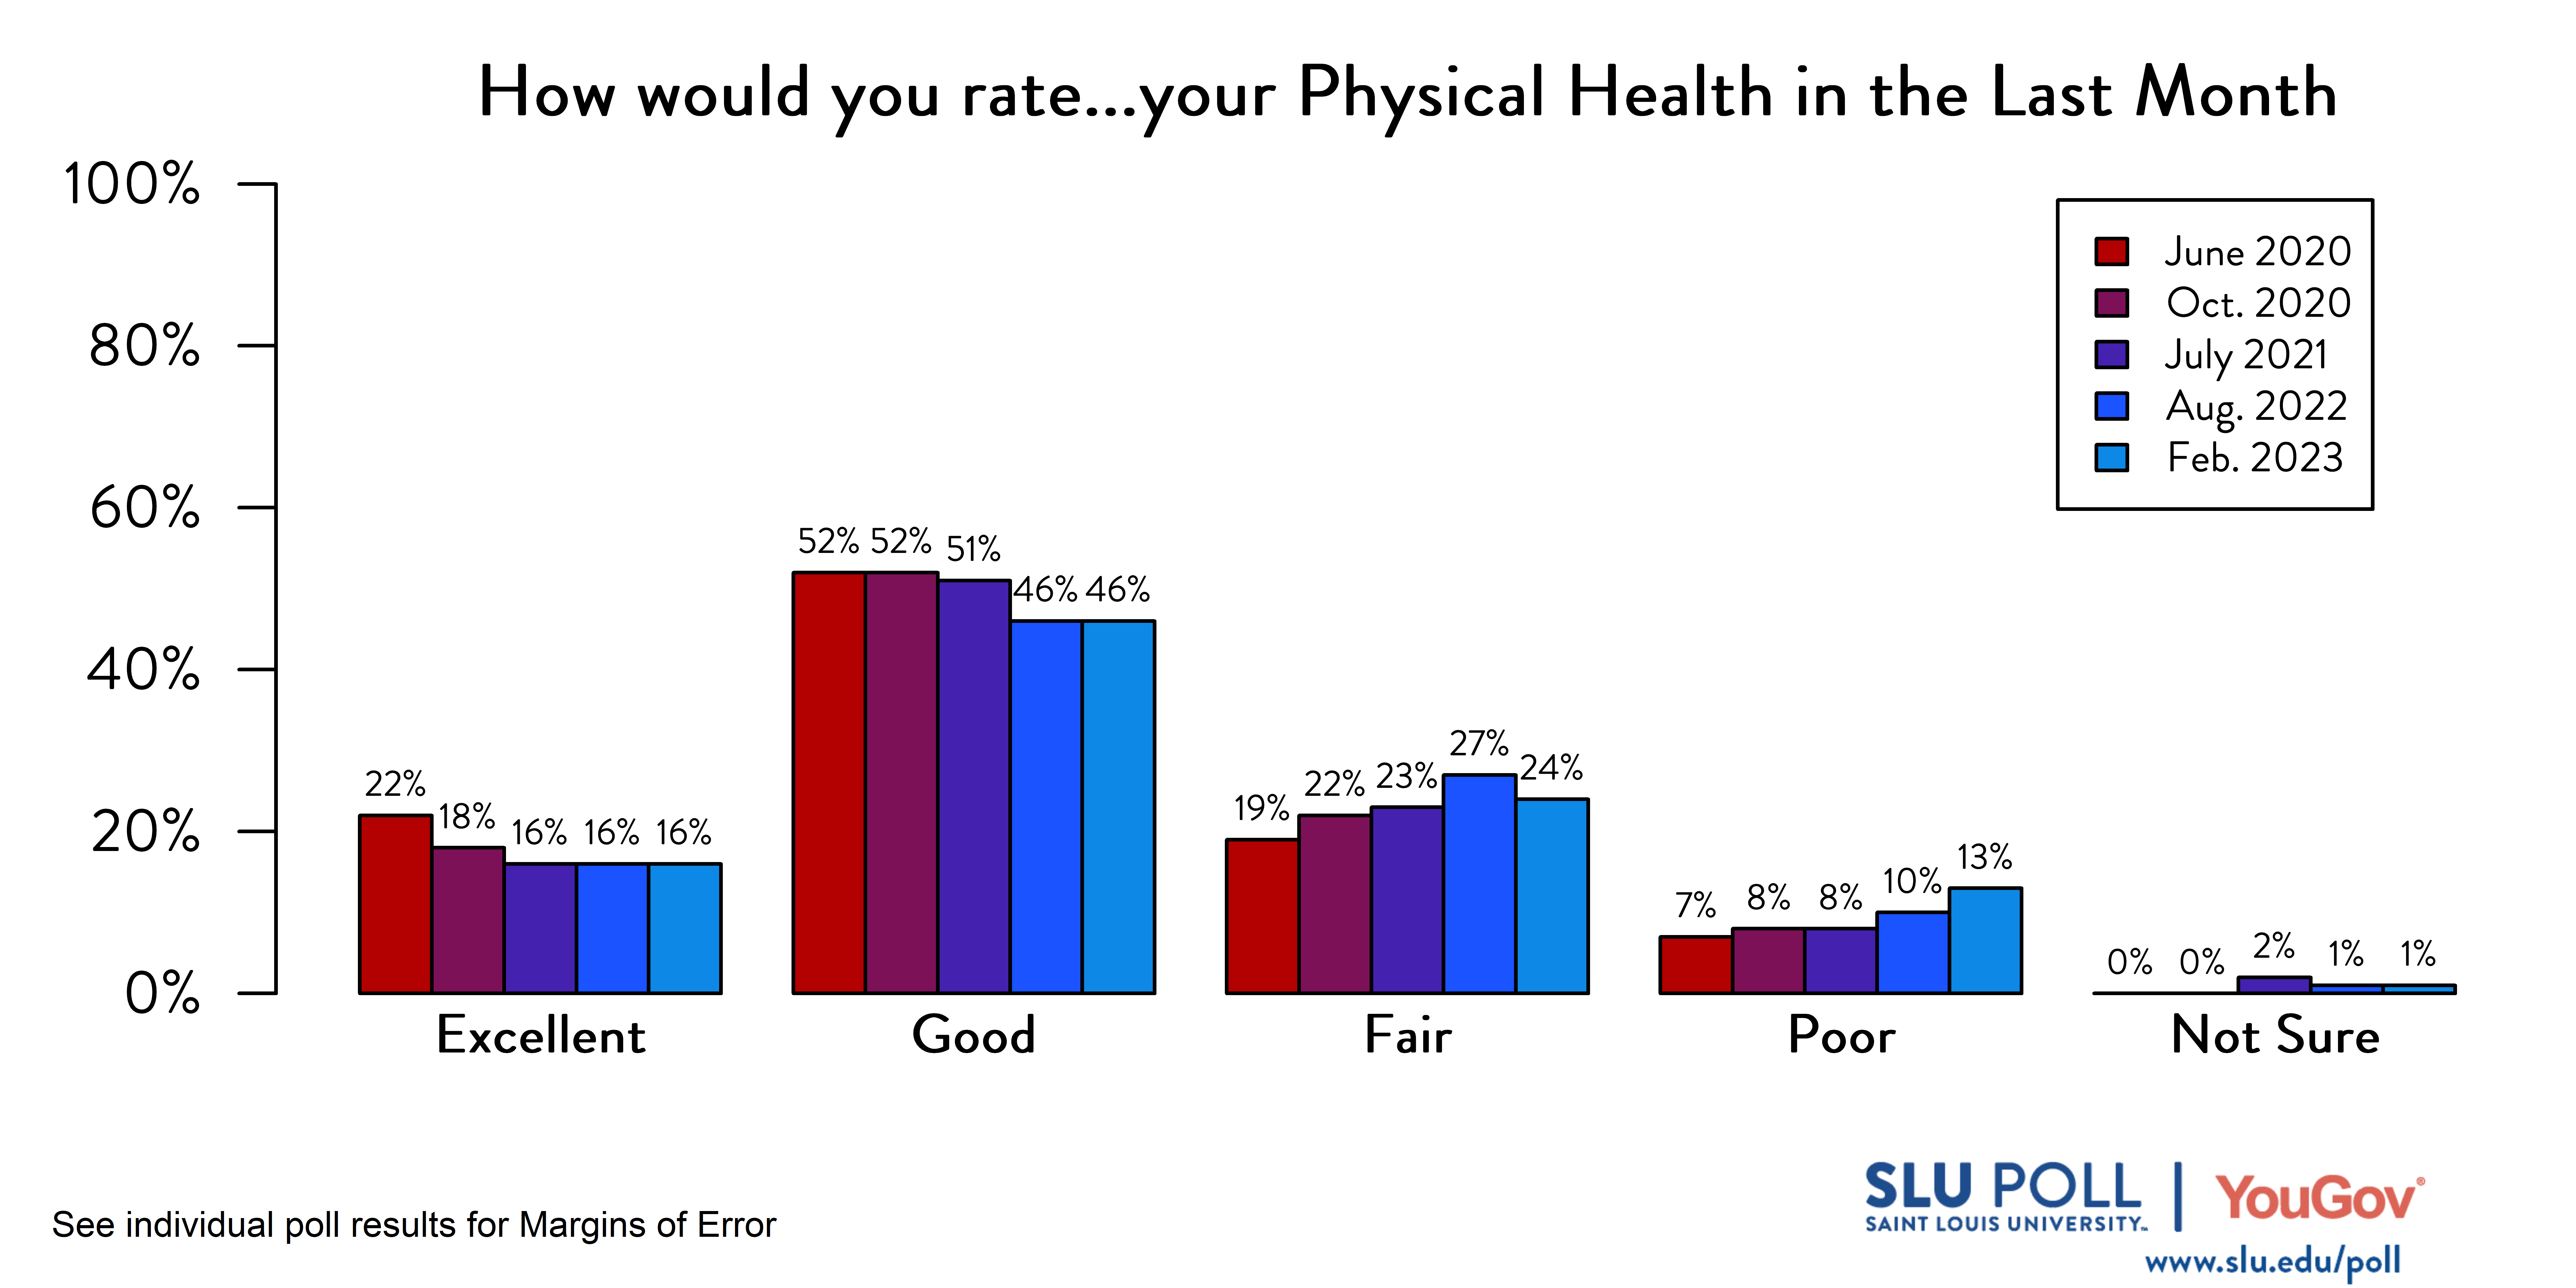 Likely voters' responses to 'How would you rate the condition of the following: Your physical health in the last month?'. June 2020 Voter Responses 22% Excellent, 52% Good, 19% Fair, 7% Poor, and 0% Not sure. October 2020 Voter Responses: 18% Excellent, 52% Good, 22% Fair, 8% Poor, and 0% Not sure. July 2021 Voter Responses: 16% Excellent, 51% Good, 23% Fair, 8% Poor, and 2% Not sure. August 2022 Voter Responses: 16% Excellent, 46% Good, 27% Fair, 10% Poor, and 1% Not sure. Februrary 2023 Voter Responses: 16% Excellent, 46% Good, 24% Fair, 13% Poor, and 1% Not sure.